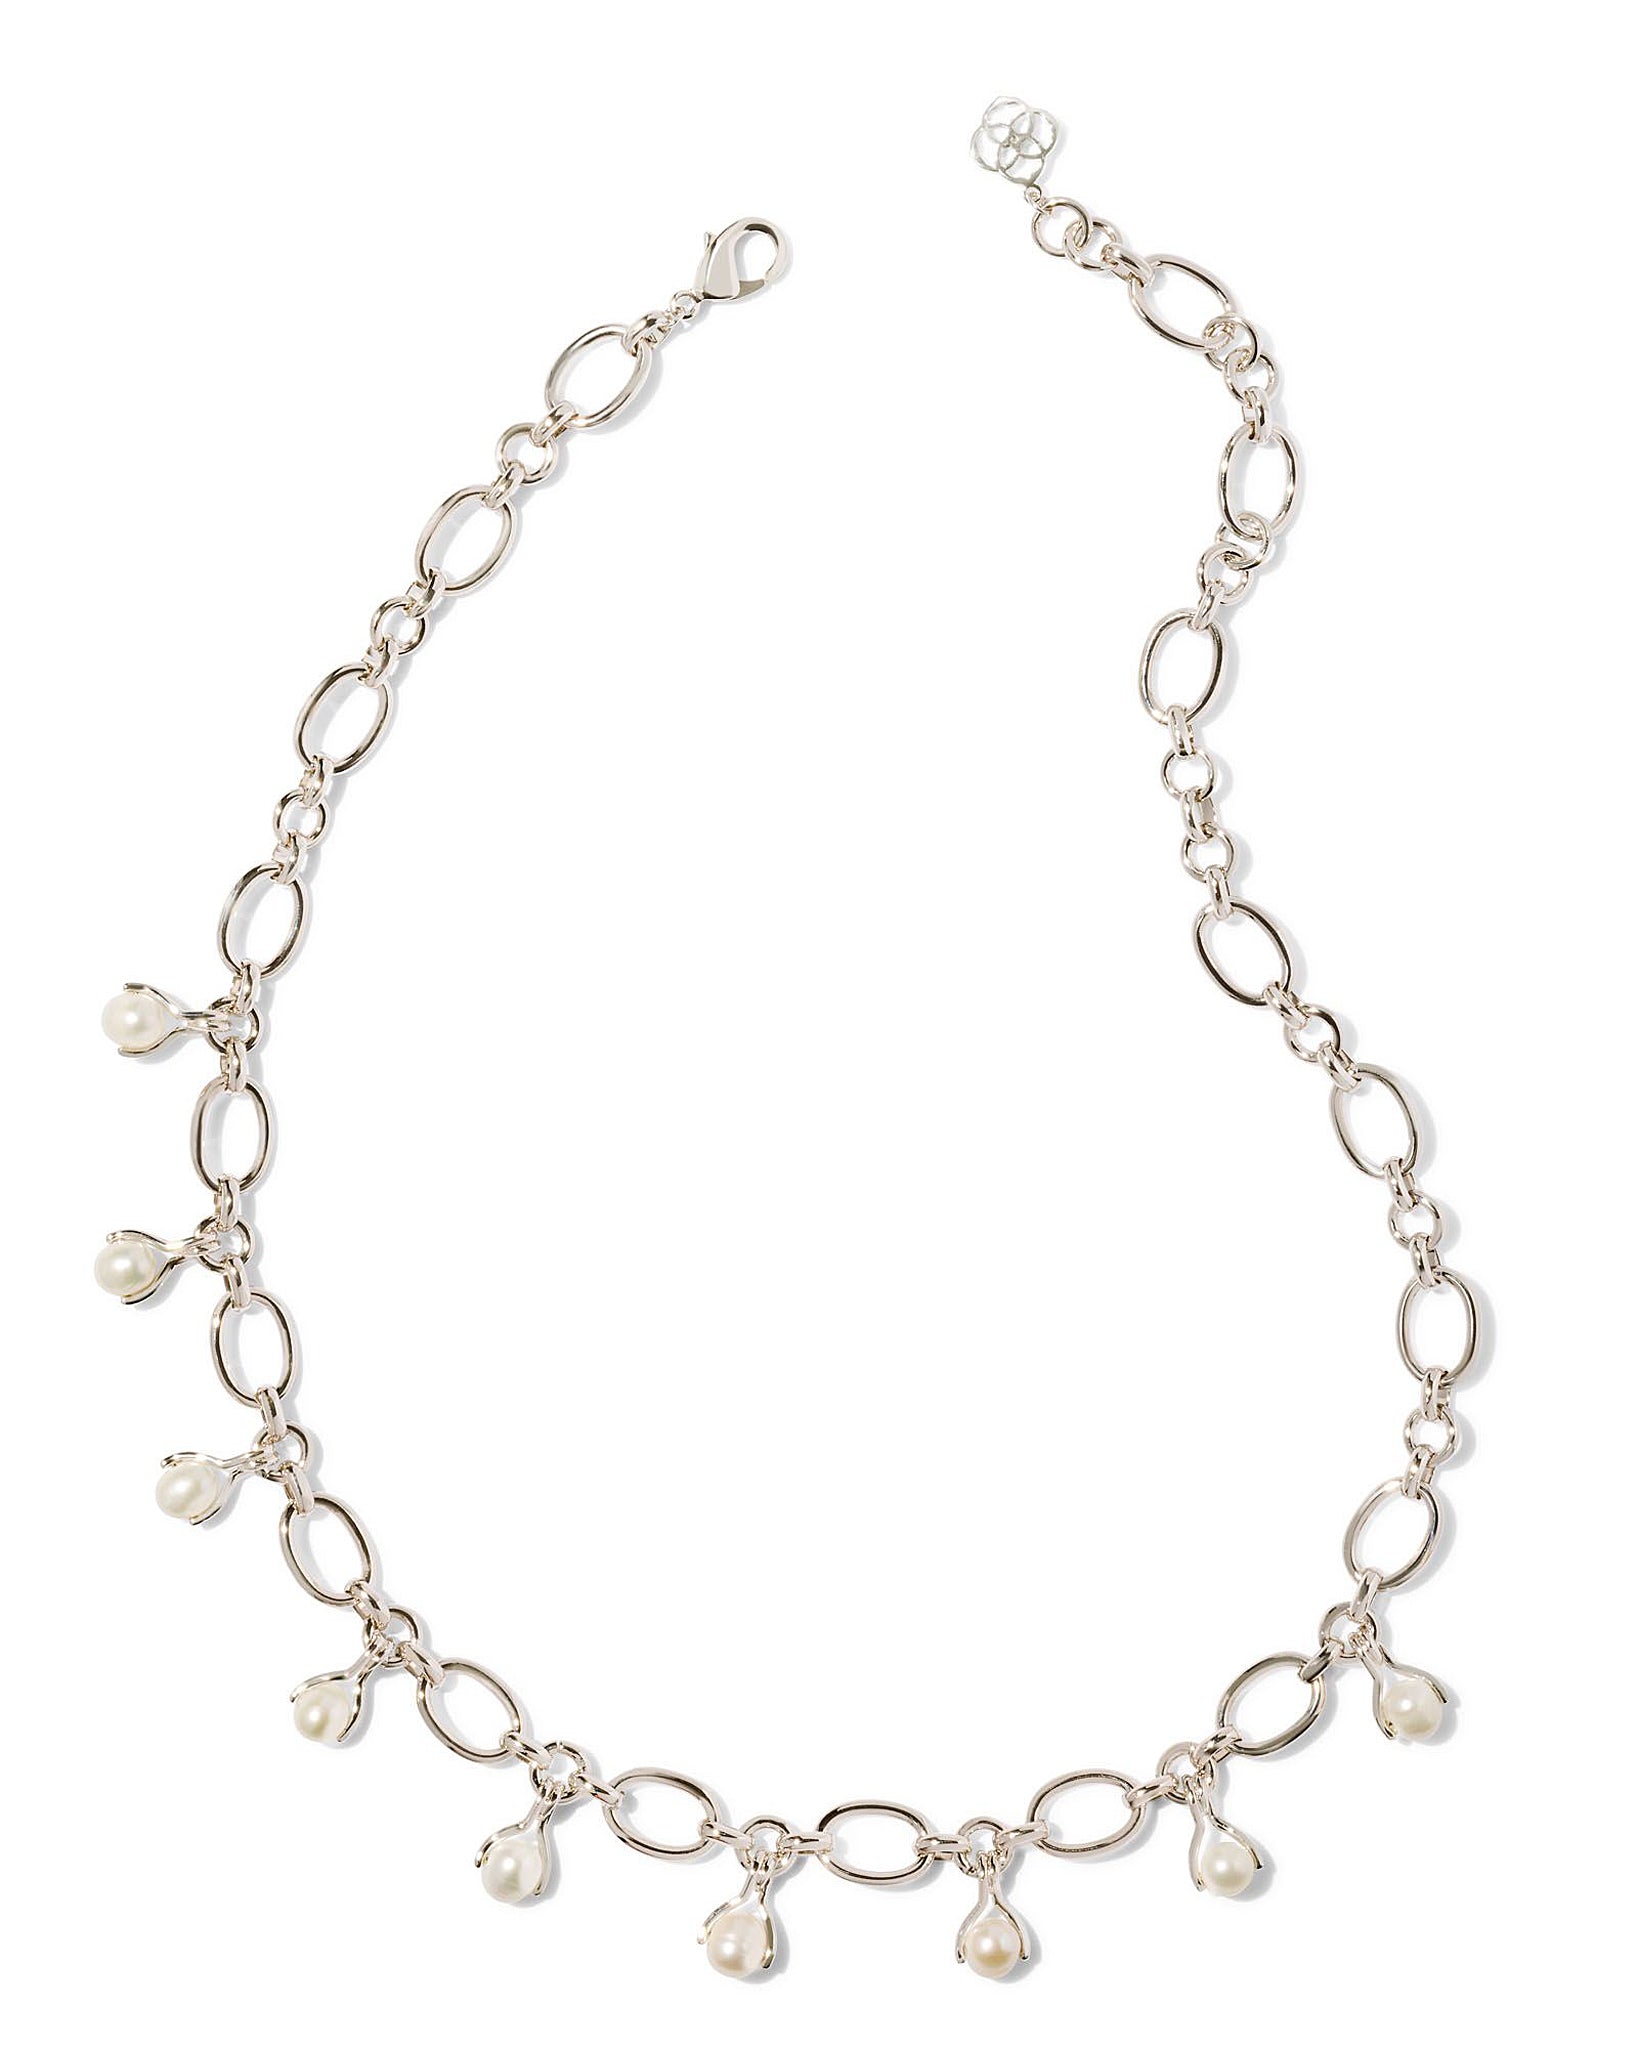 Kendra Scott Ashton Chain Charm Necklace in White Pearl and Rhodium Plated